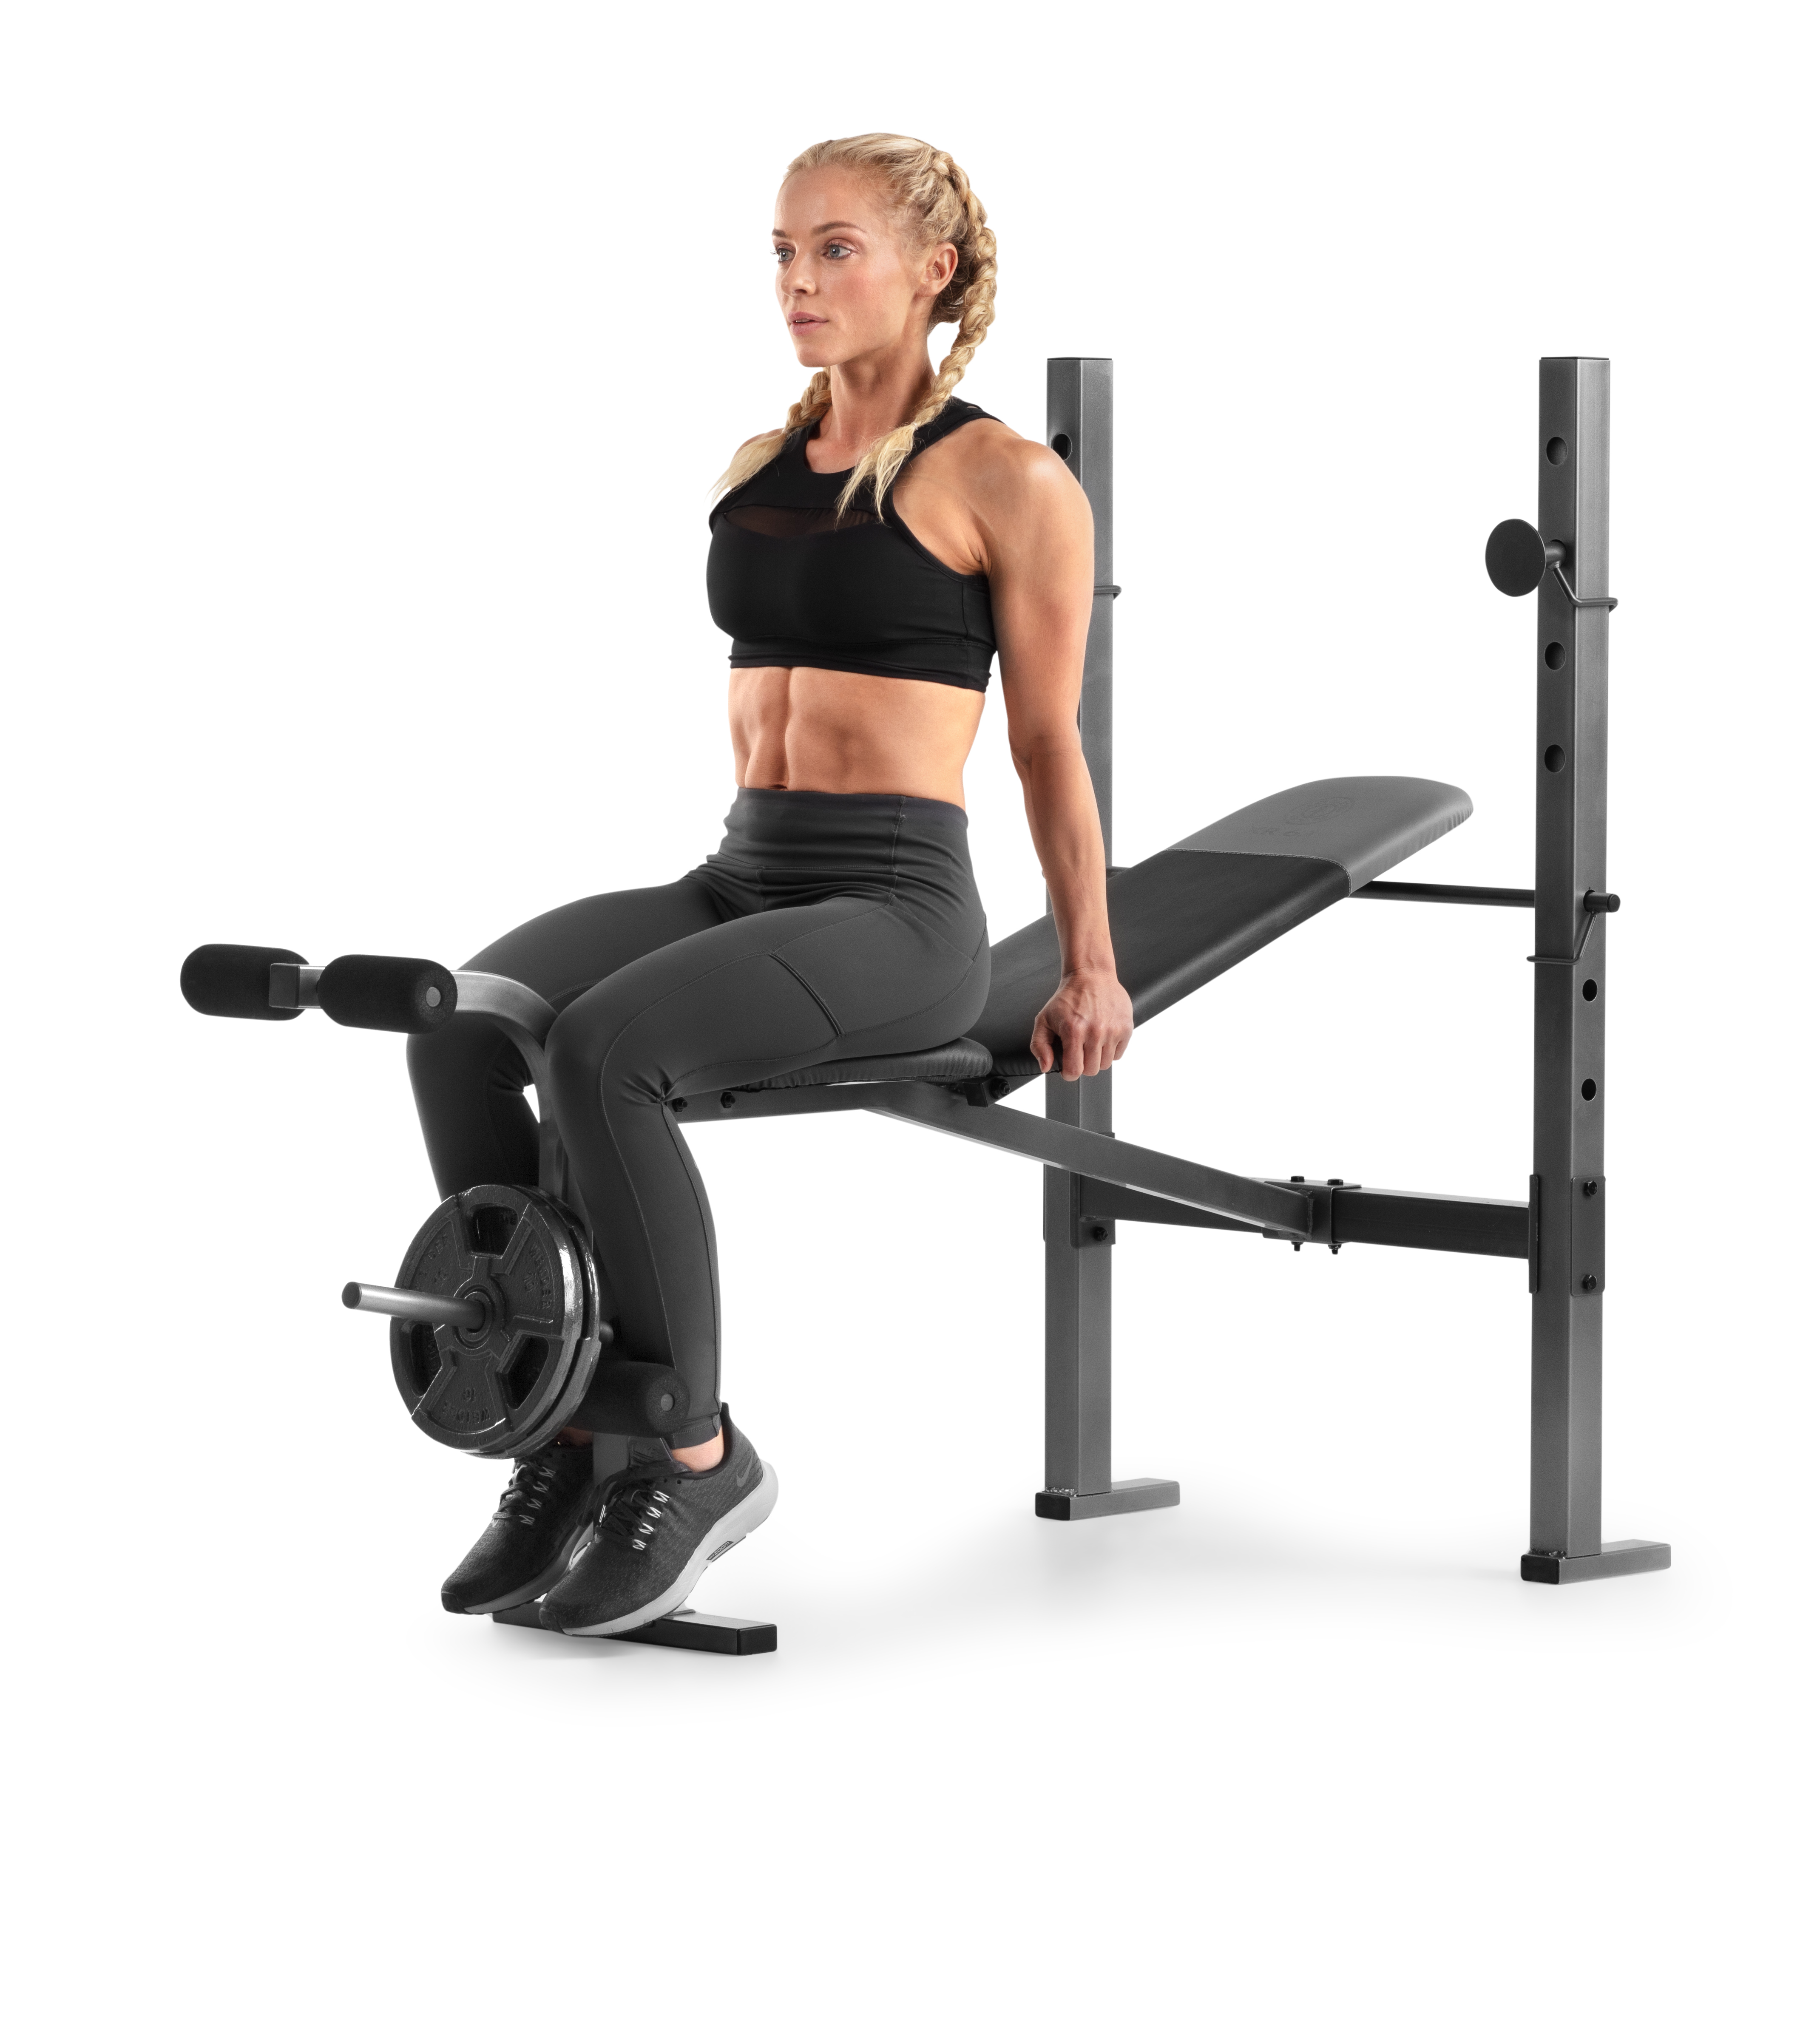 Gold’s Gym XR 6.1 Multi-Position Weight Bench with Leg Developer - image 5 of 11